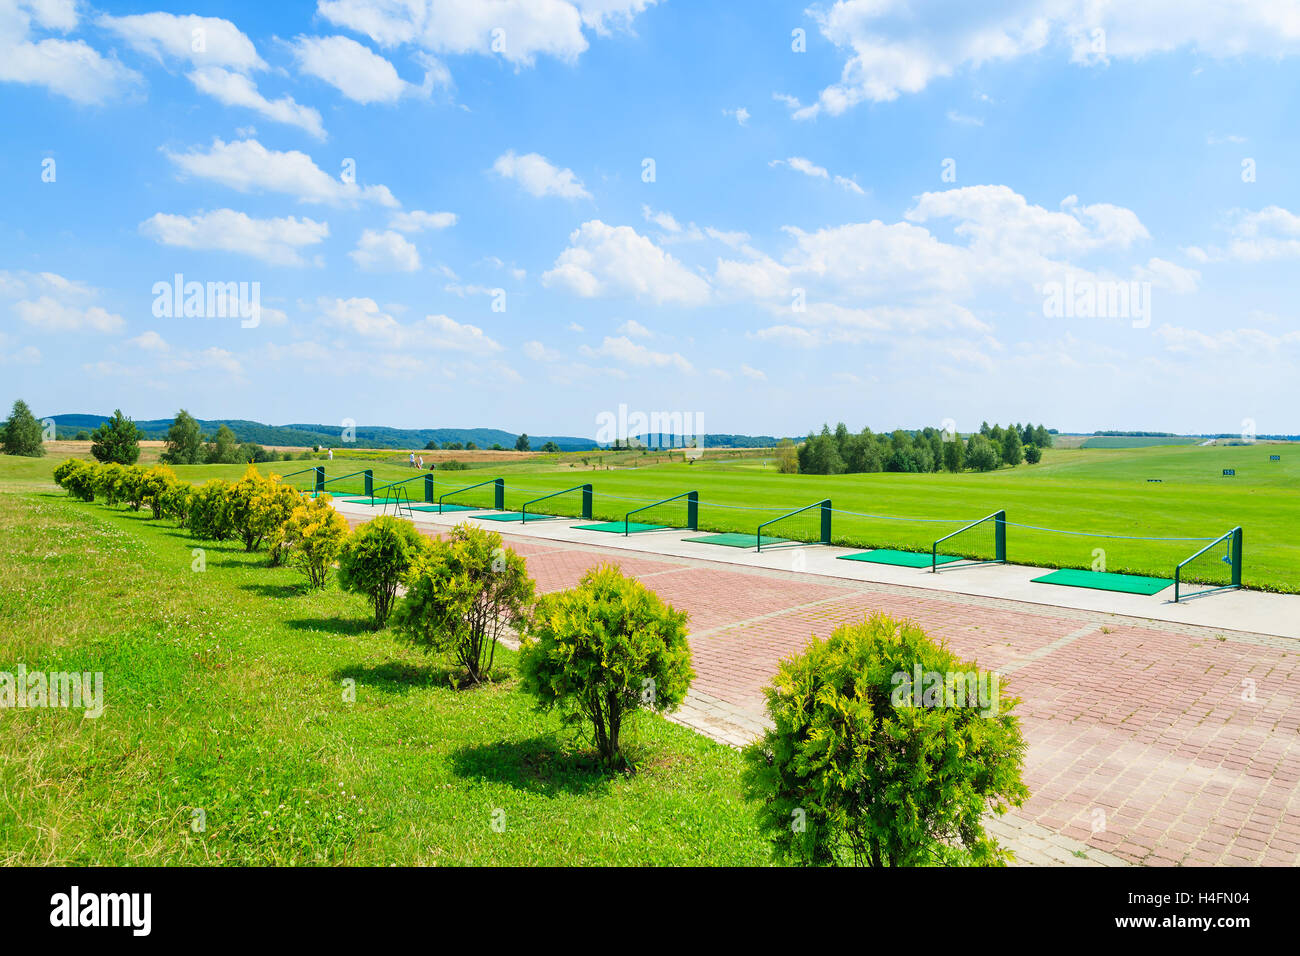 PACZULTOWICE GOLF CLUB, POLAND - AUG 9, 2014: golf course green play area in Paczultowice village on sunny summer day, Poland. Golfing is becoming a popular sport among wealthy people from Krakow. Stock Photo